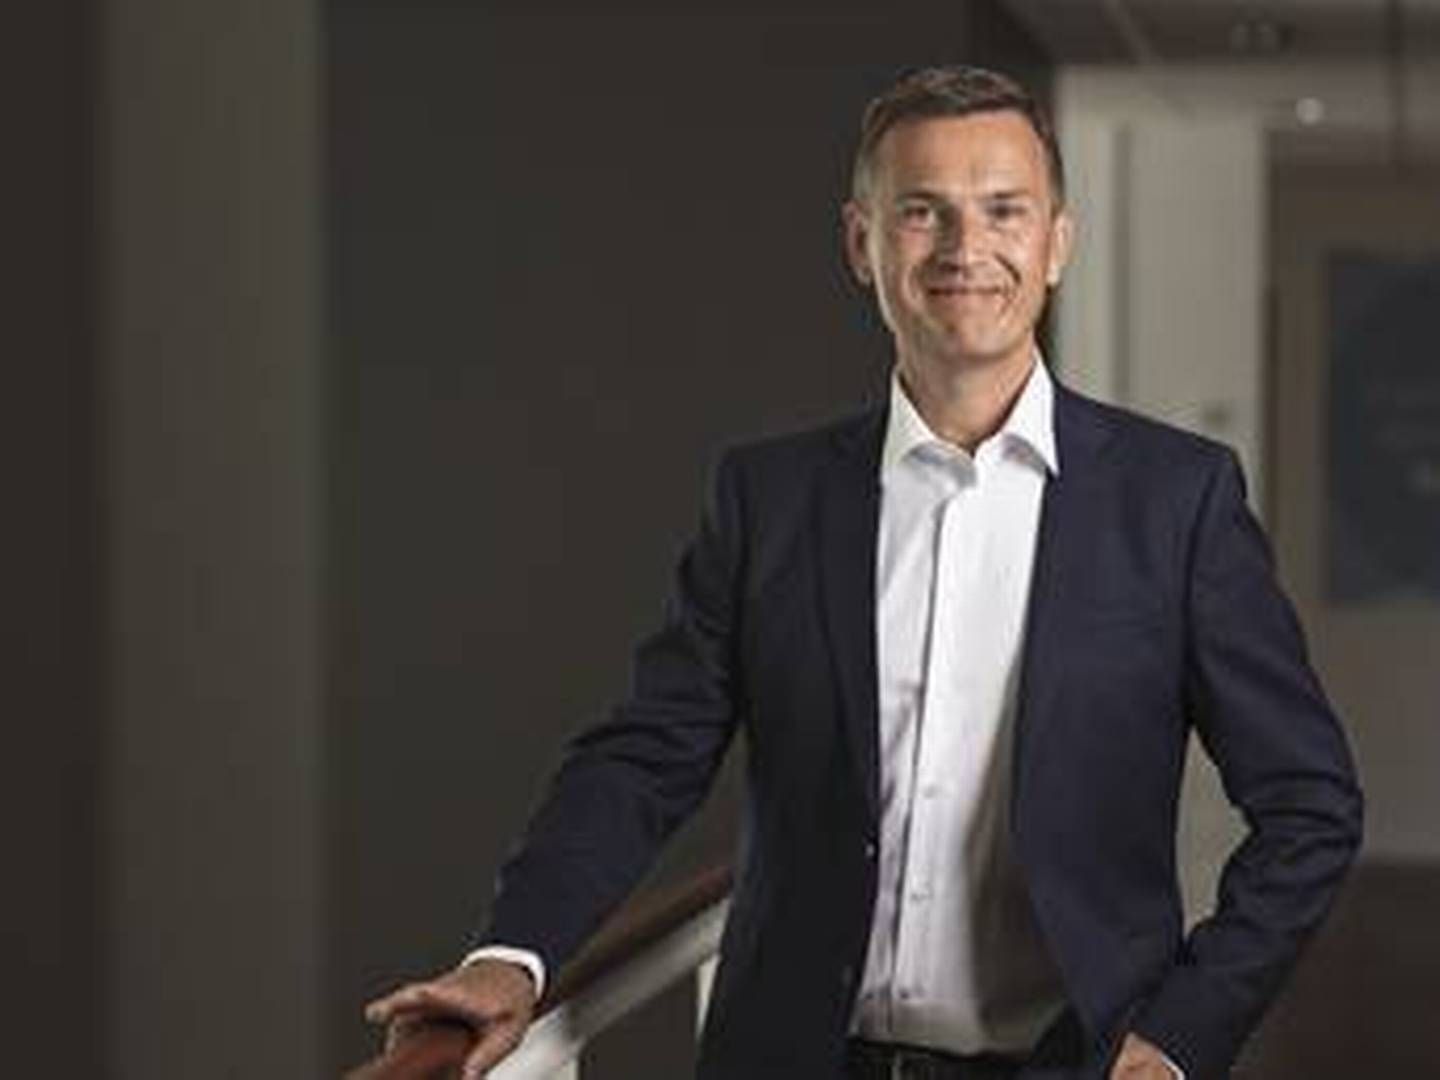 Anders Schelde, chief investment officer at MP Pension | Photo: PR/MP Pension